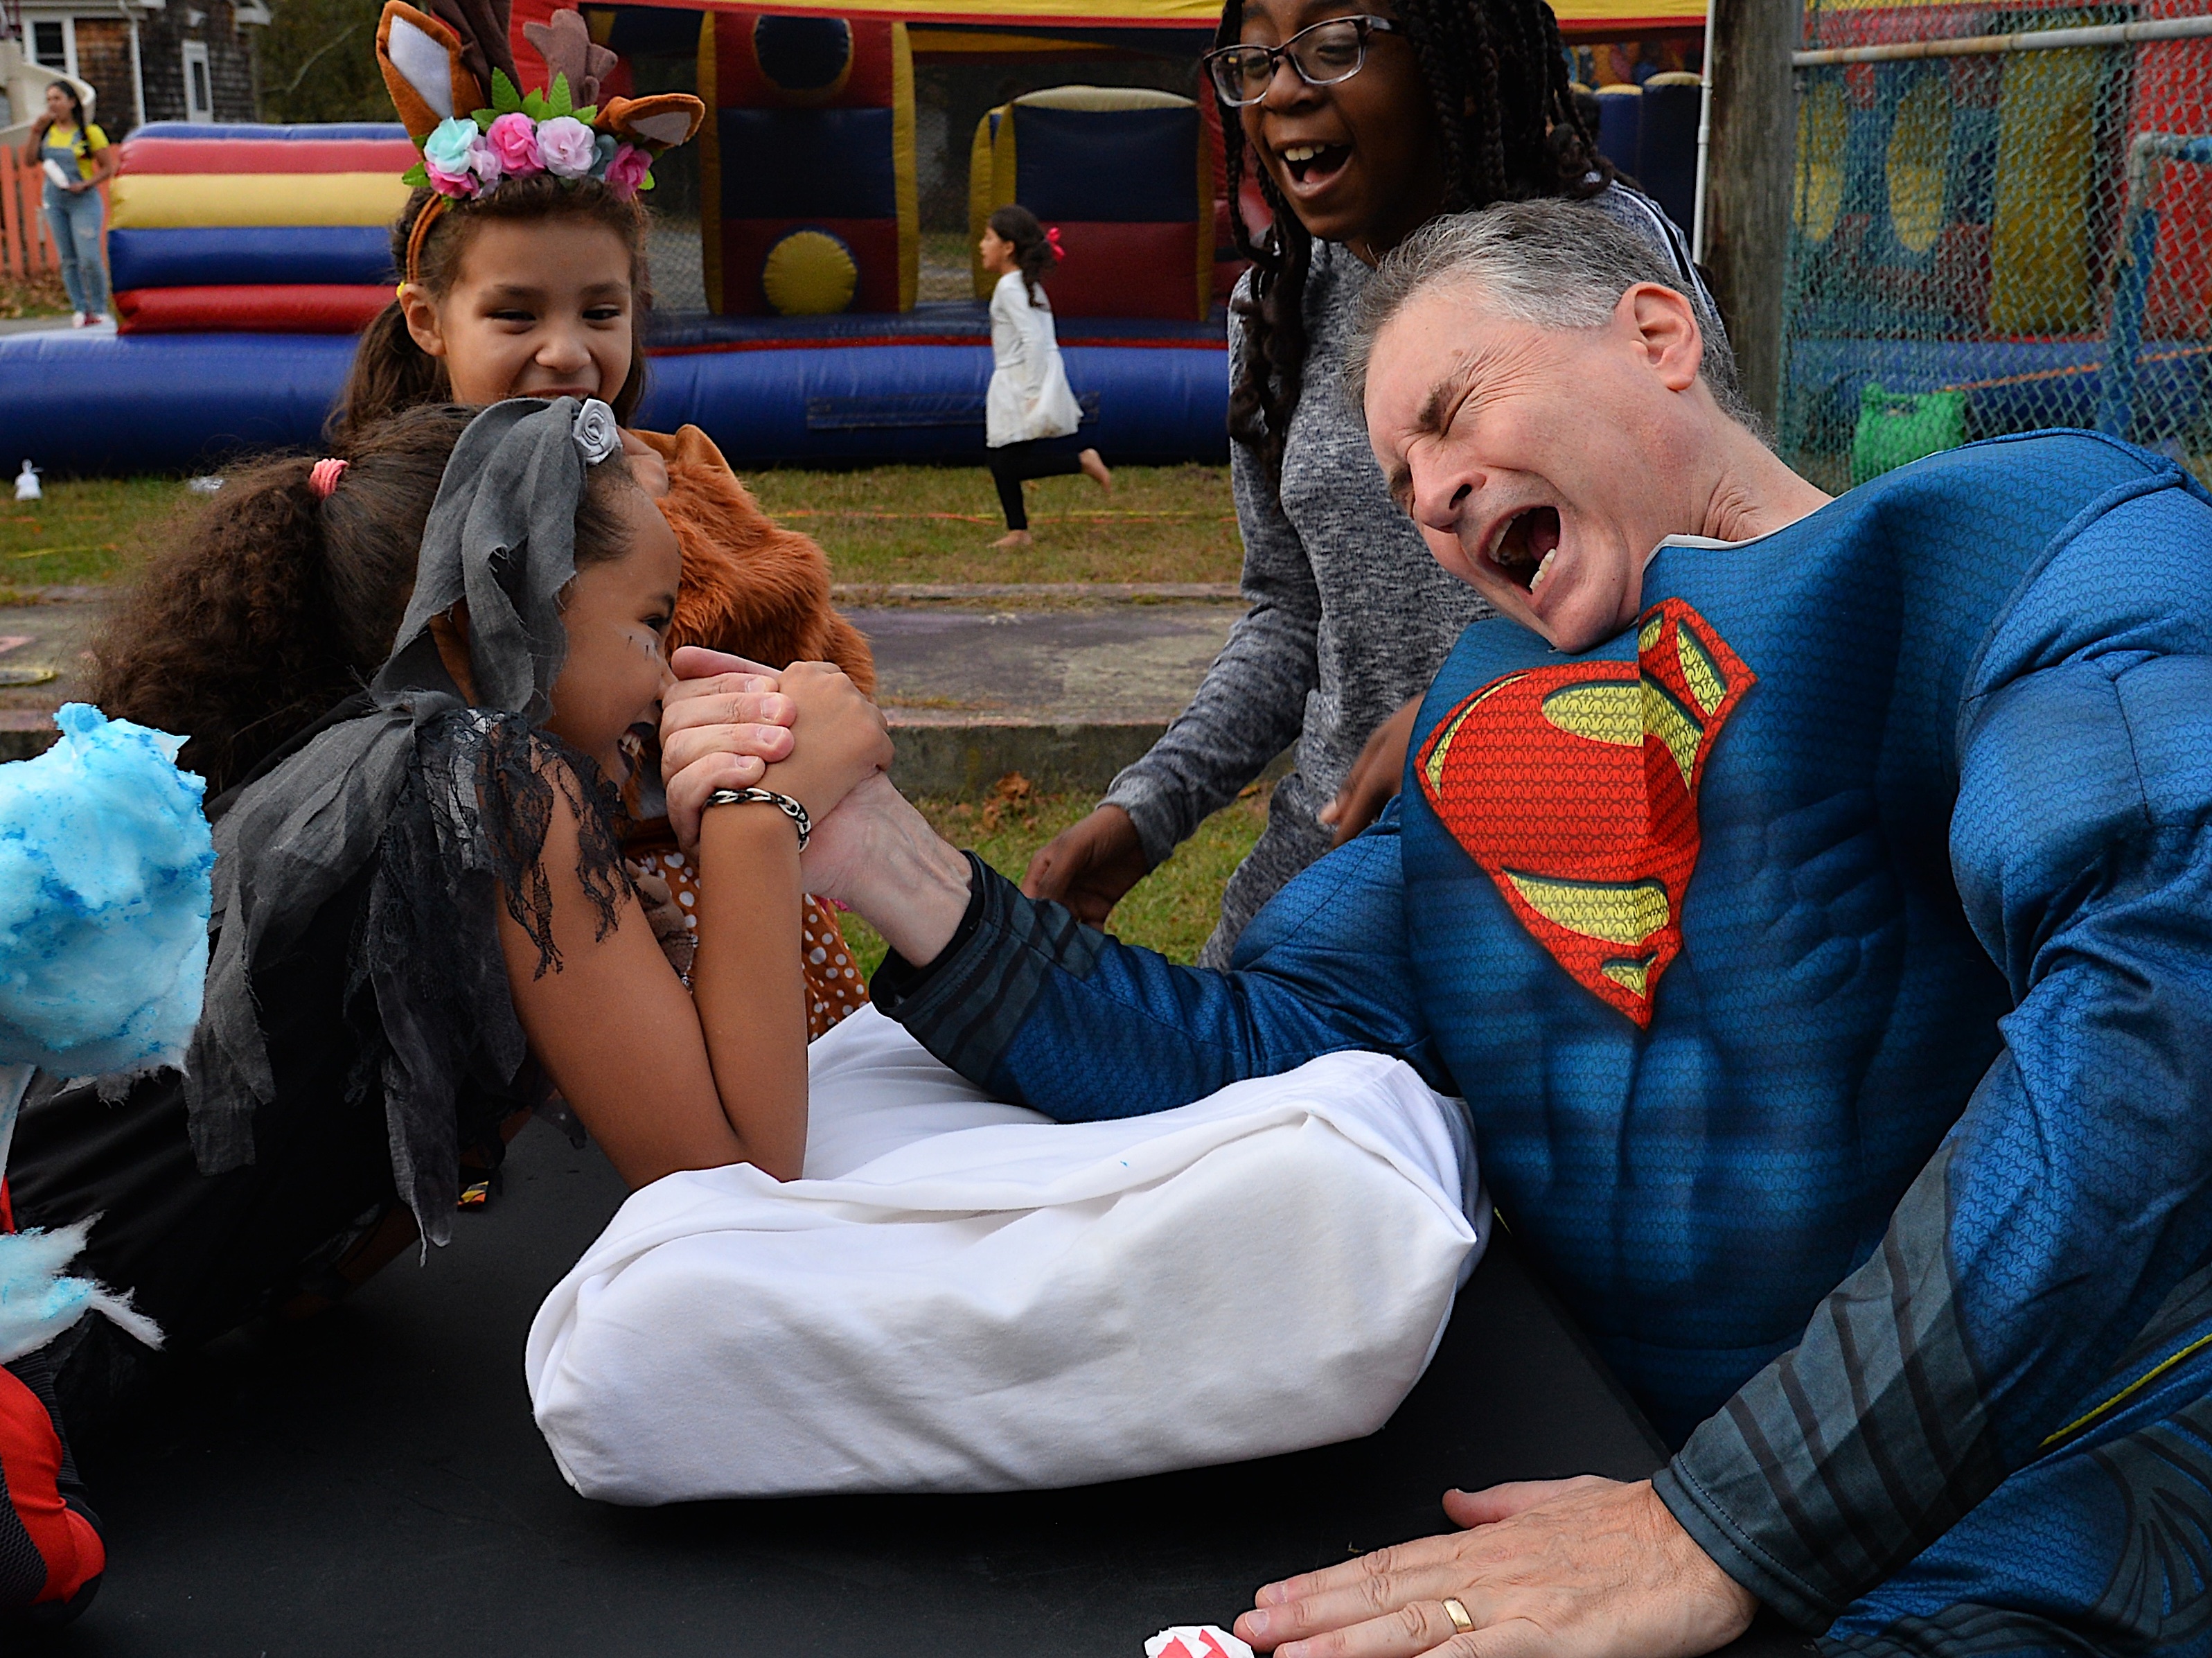 The Bridgehampton Child Care and Recreational Center hosted a Halloween party on Friday afternoon. KYRIL BROMLEY